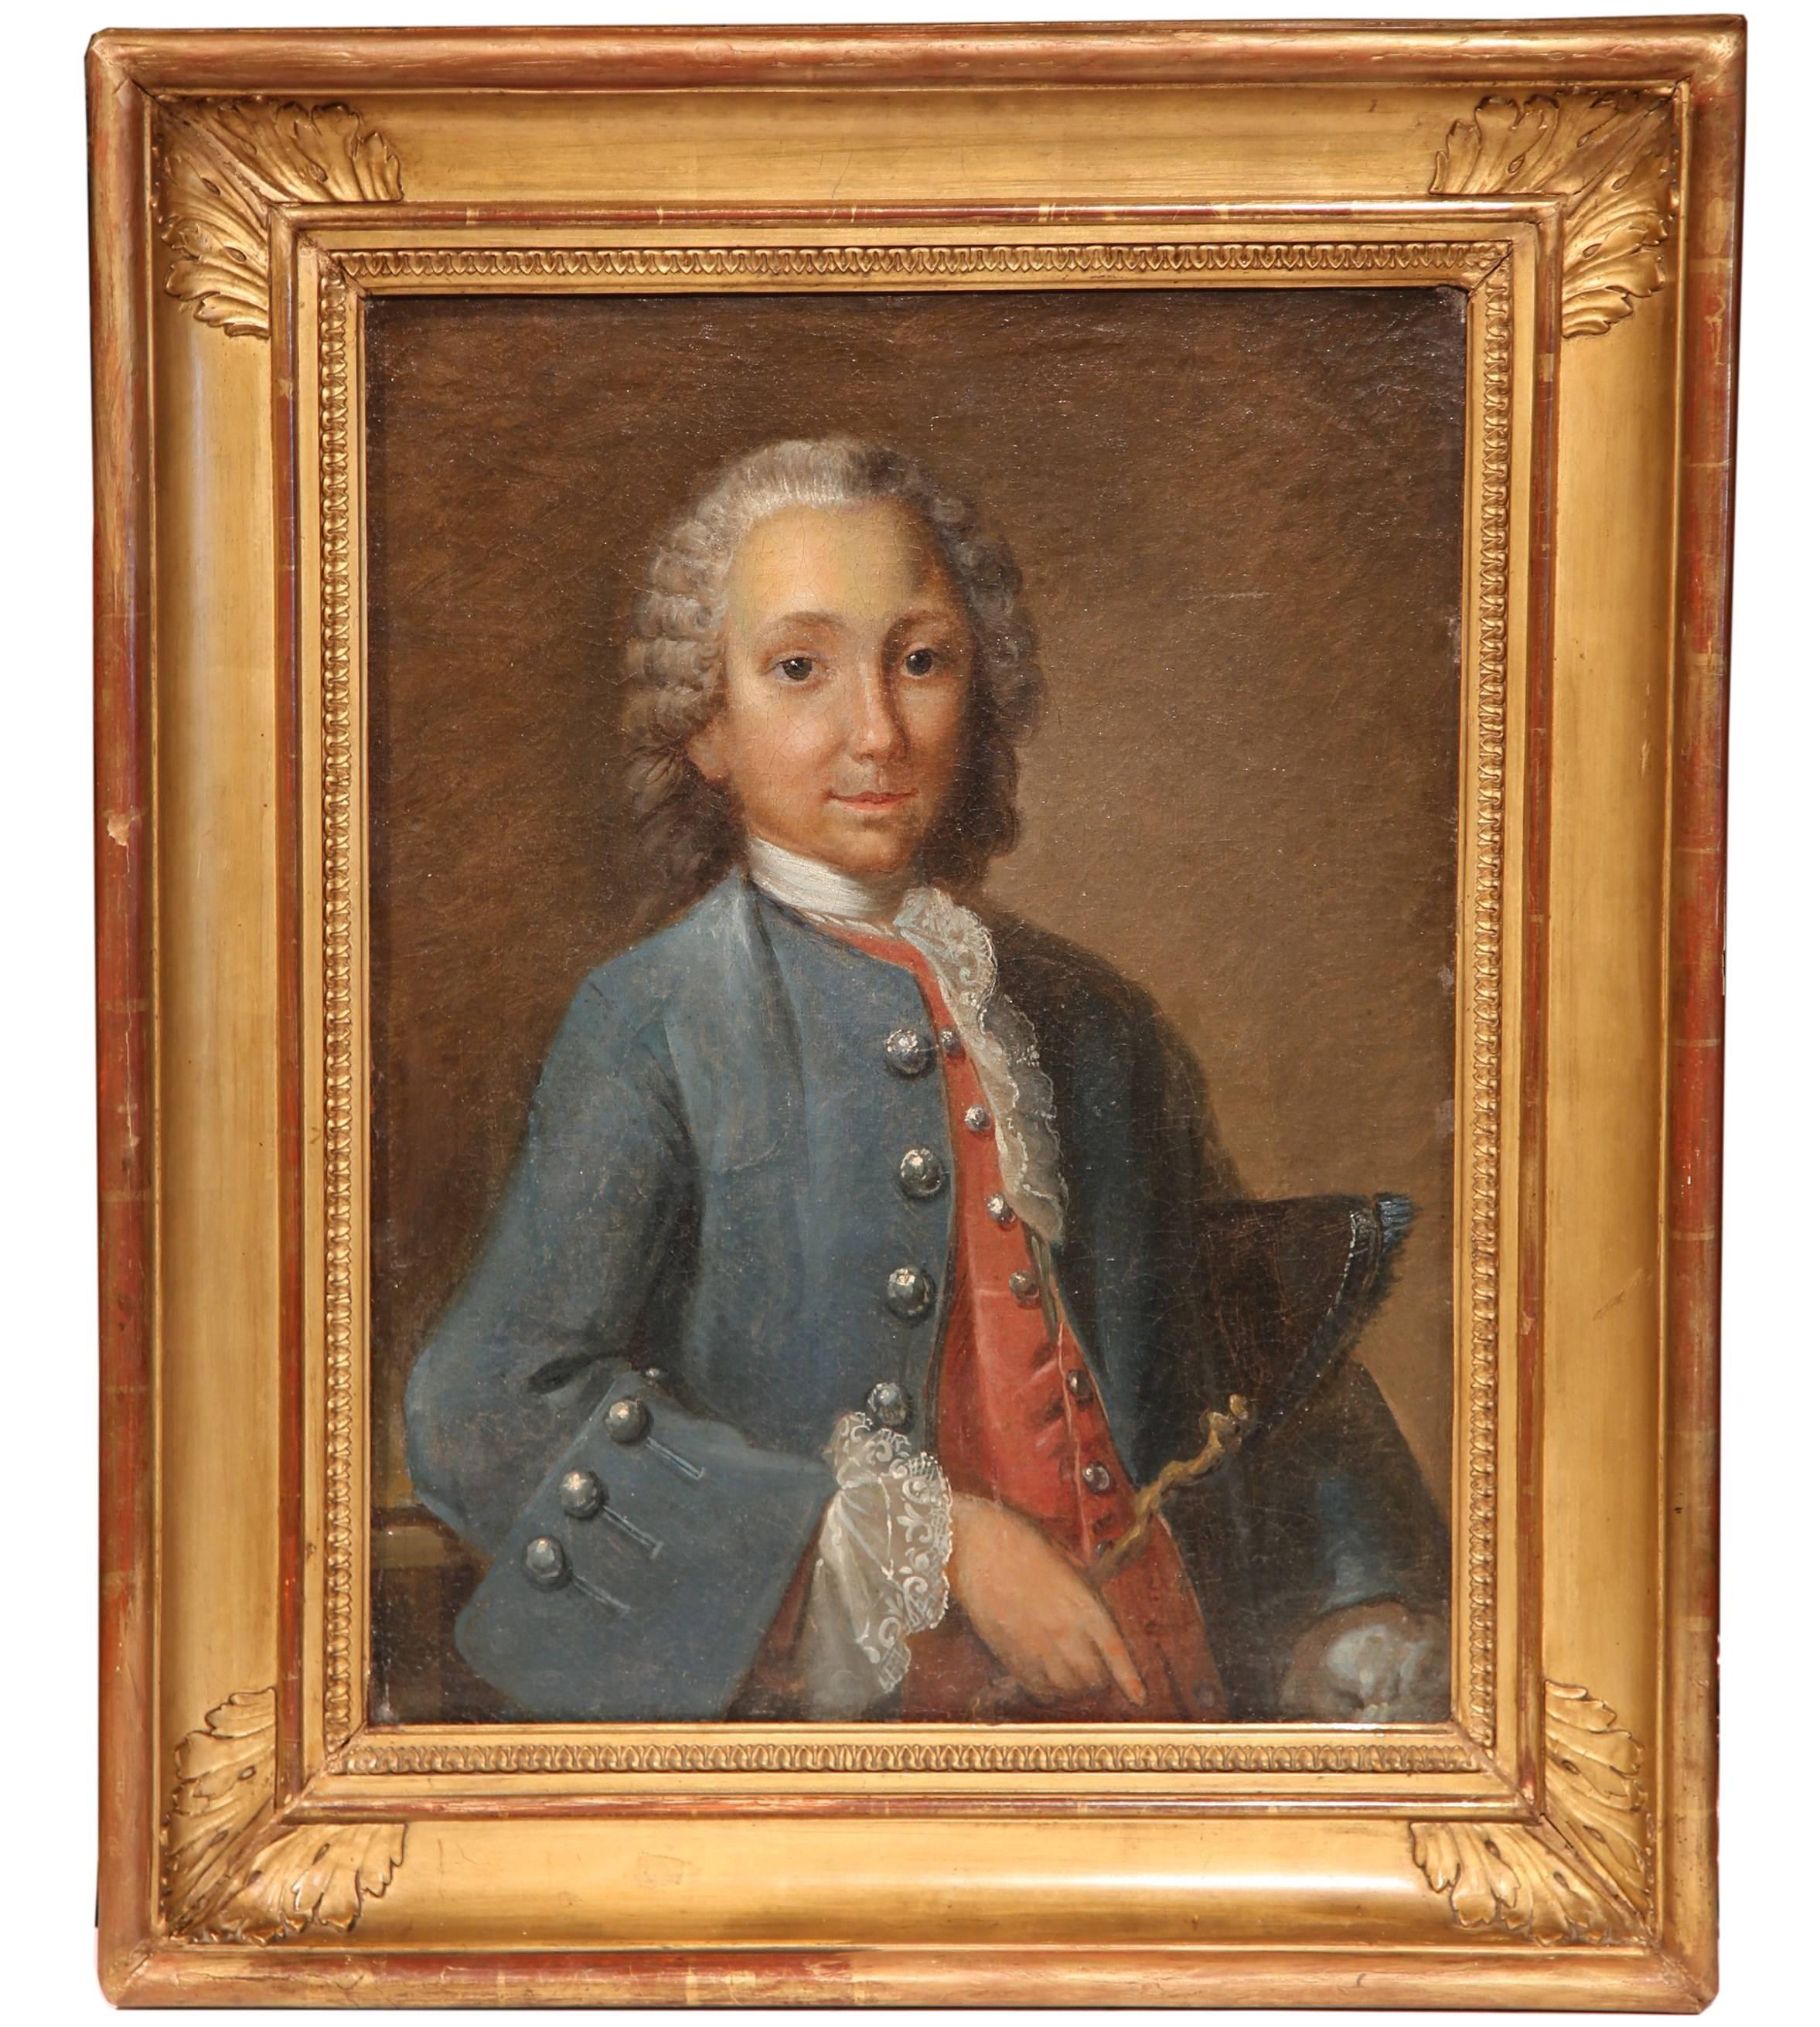 Unknown Portrait Painting - 18th Century French Oil on Canvas Framed Painting of the Marquis de Rochambeau